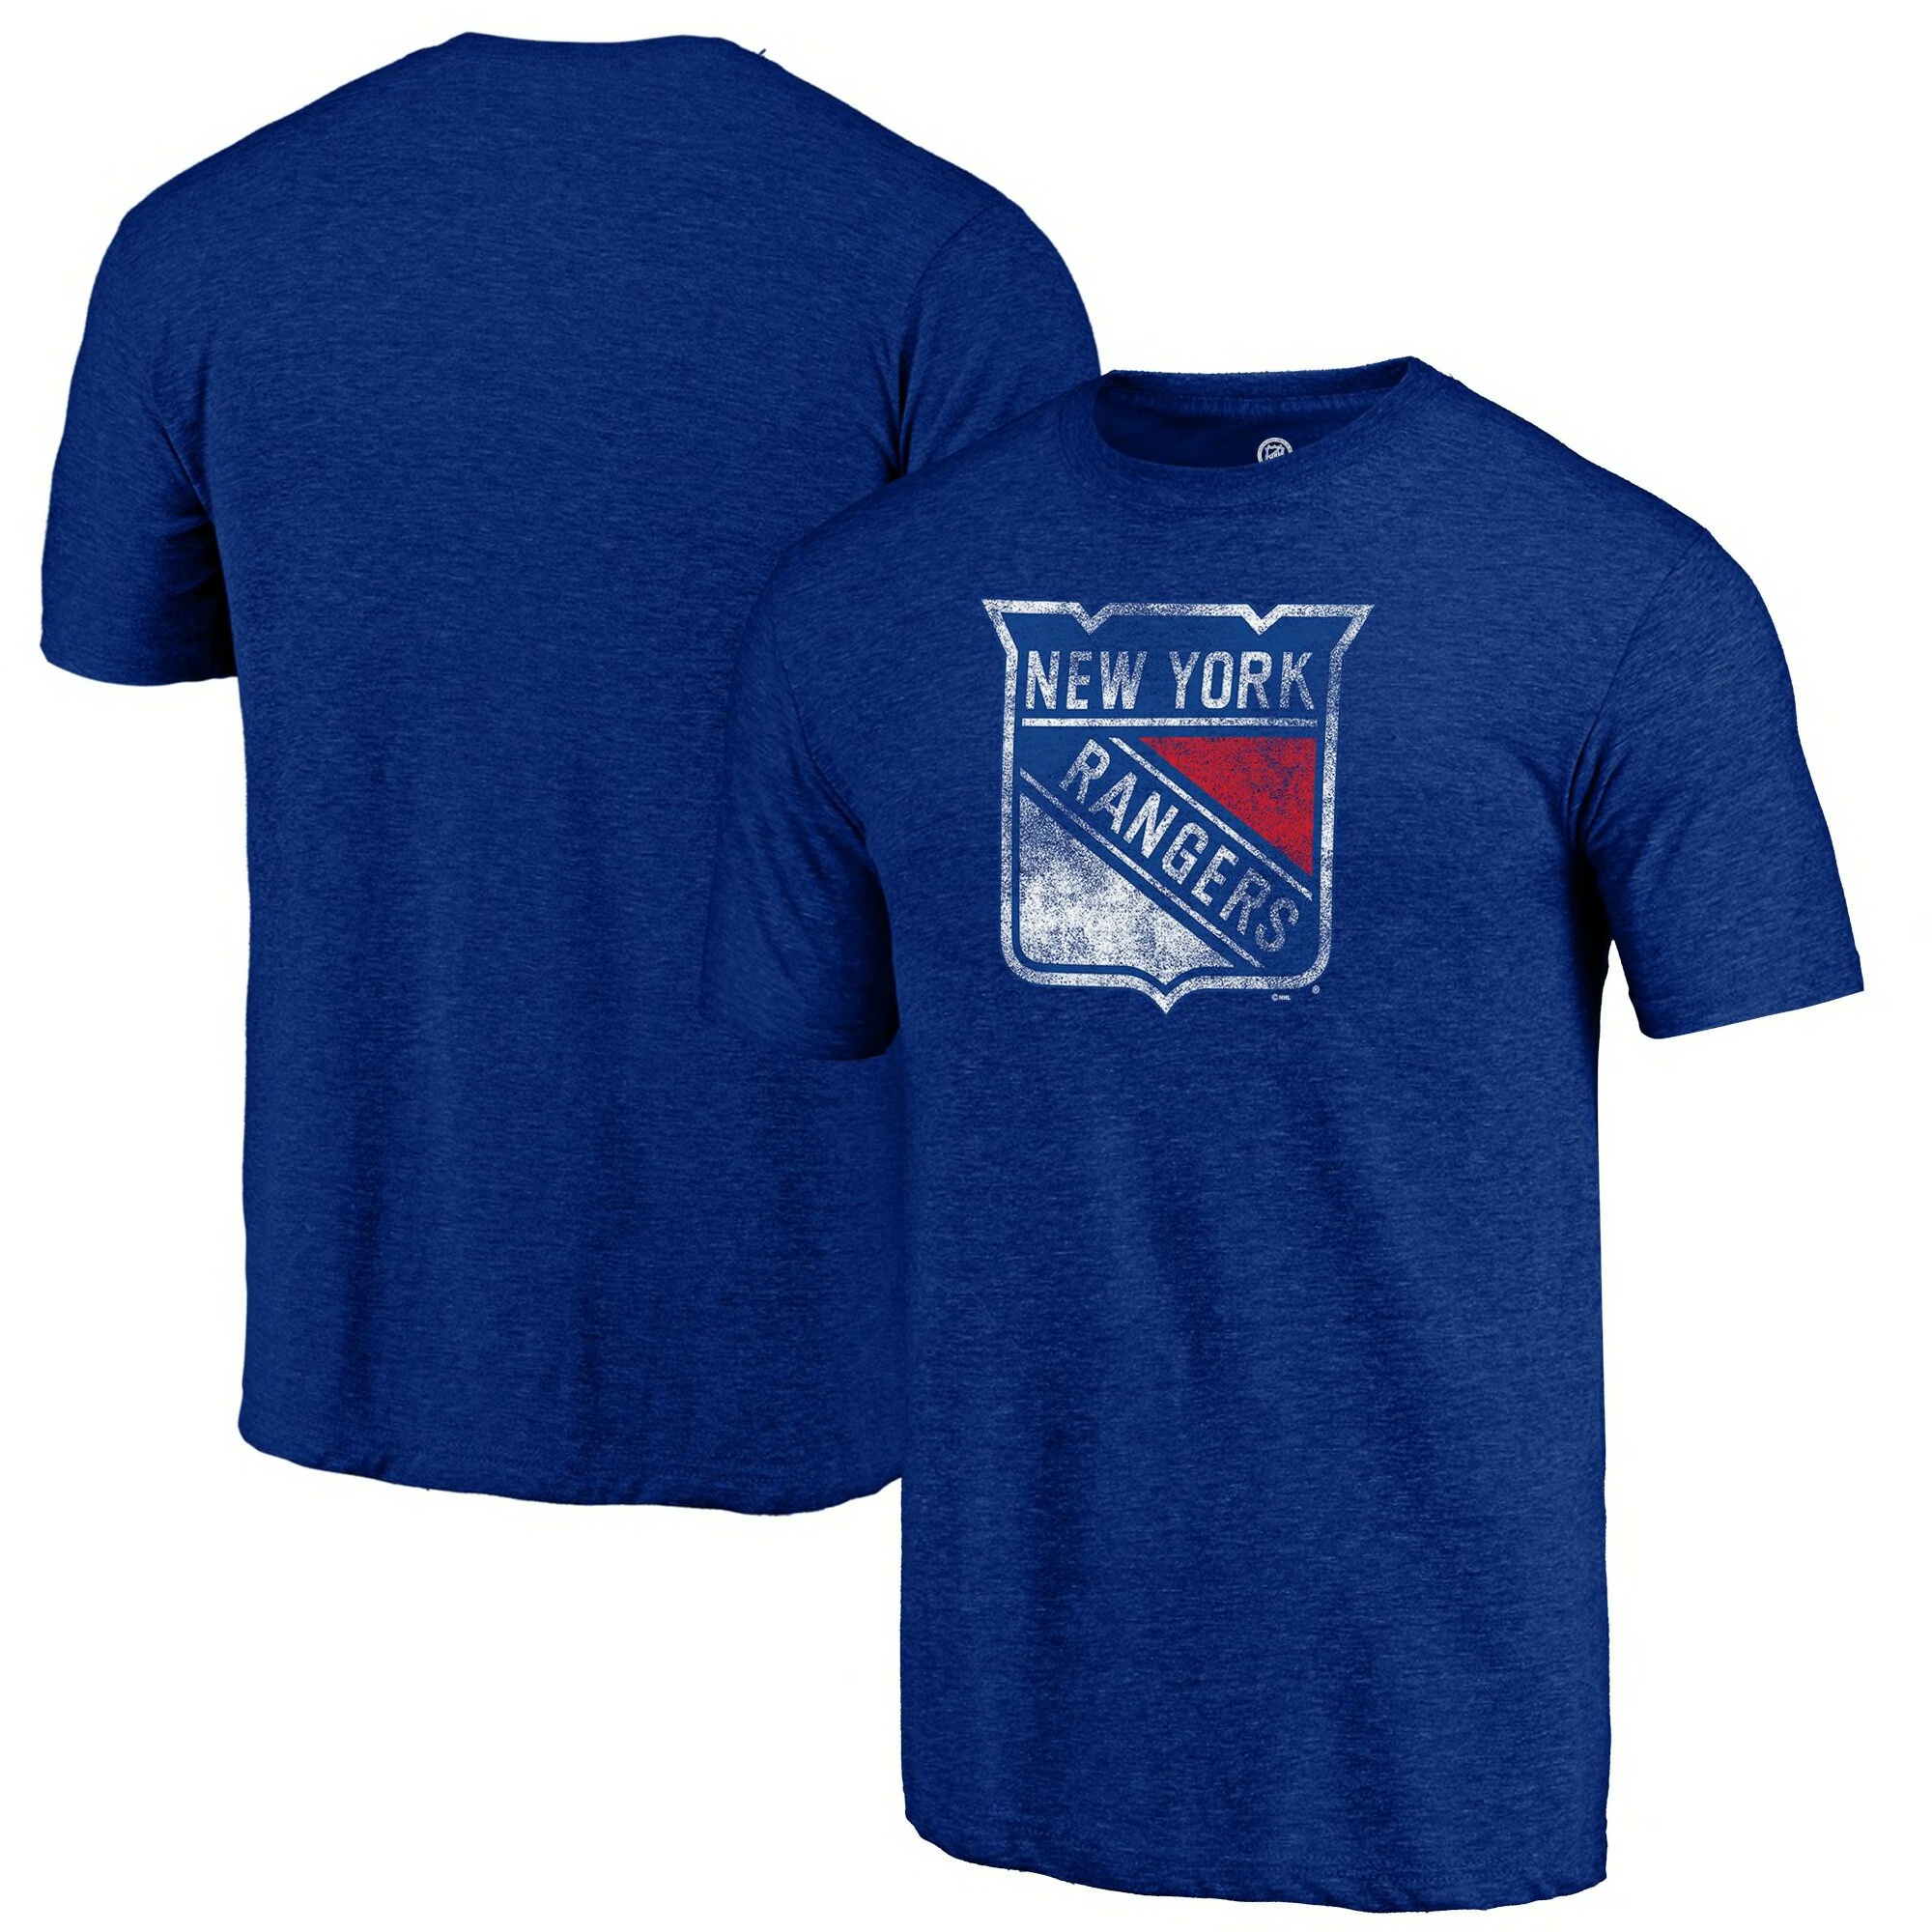 New York Rangers Gifts & Merchandise for Sale